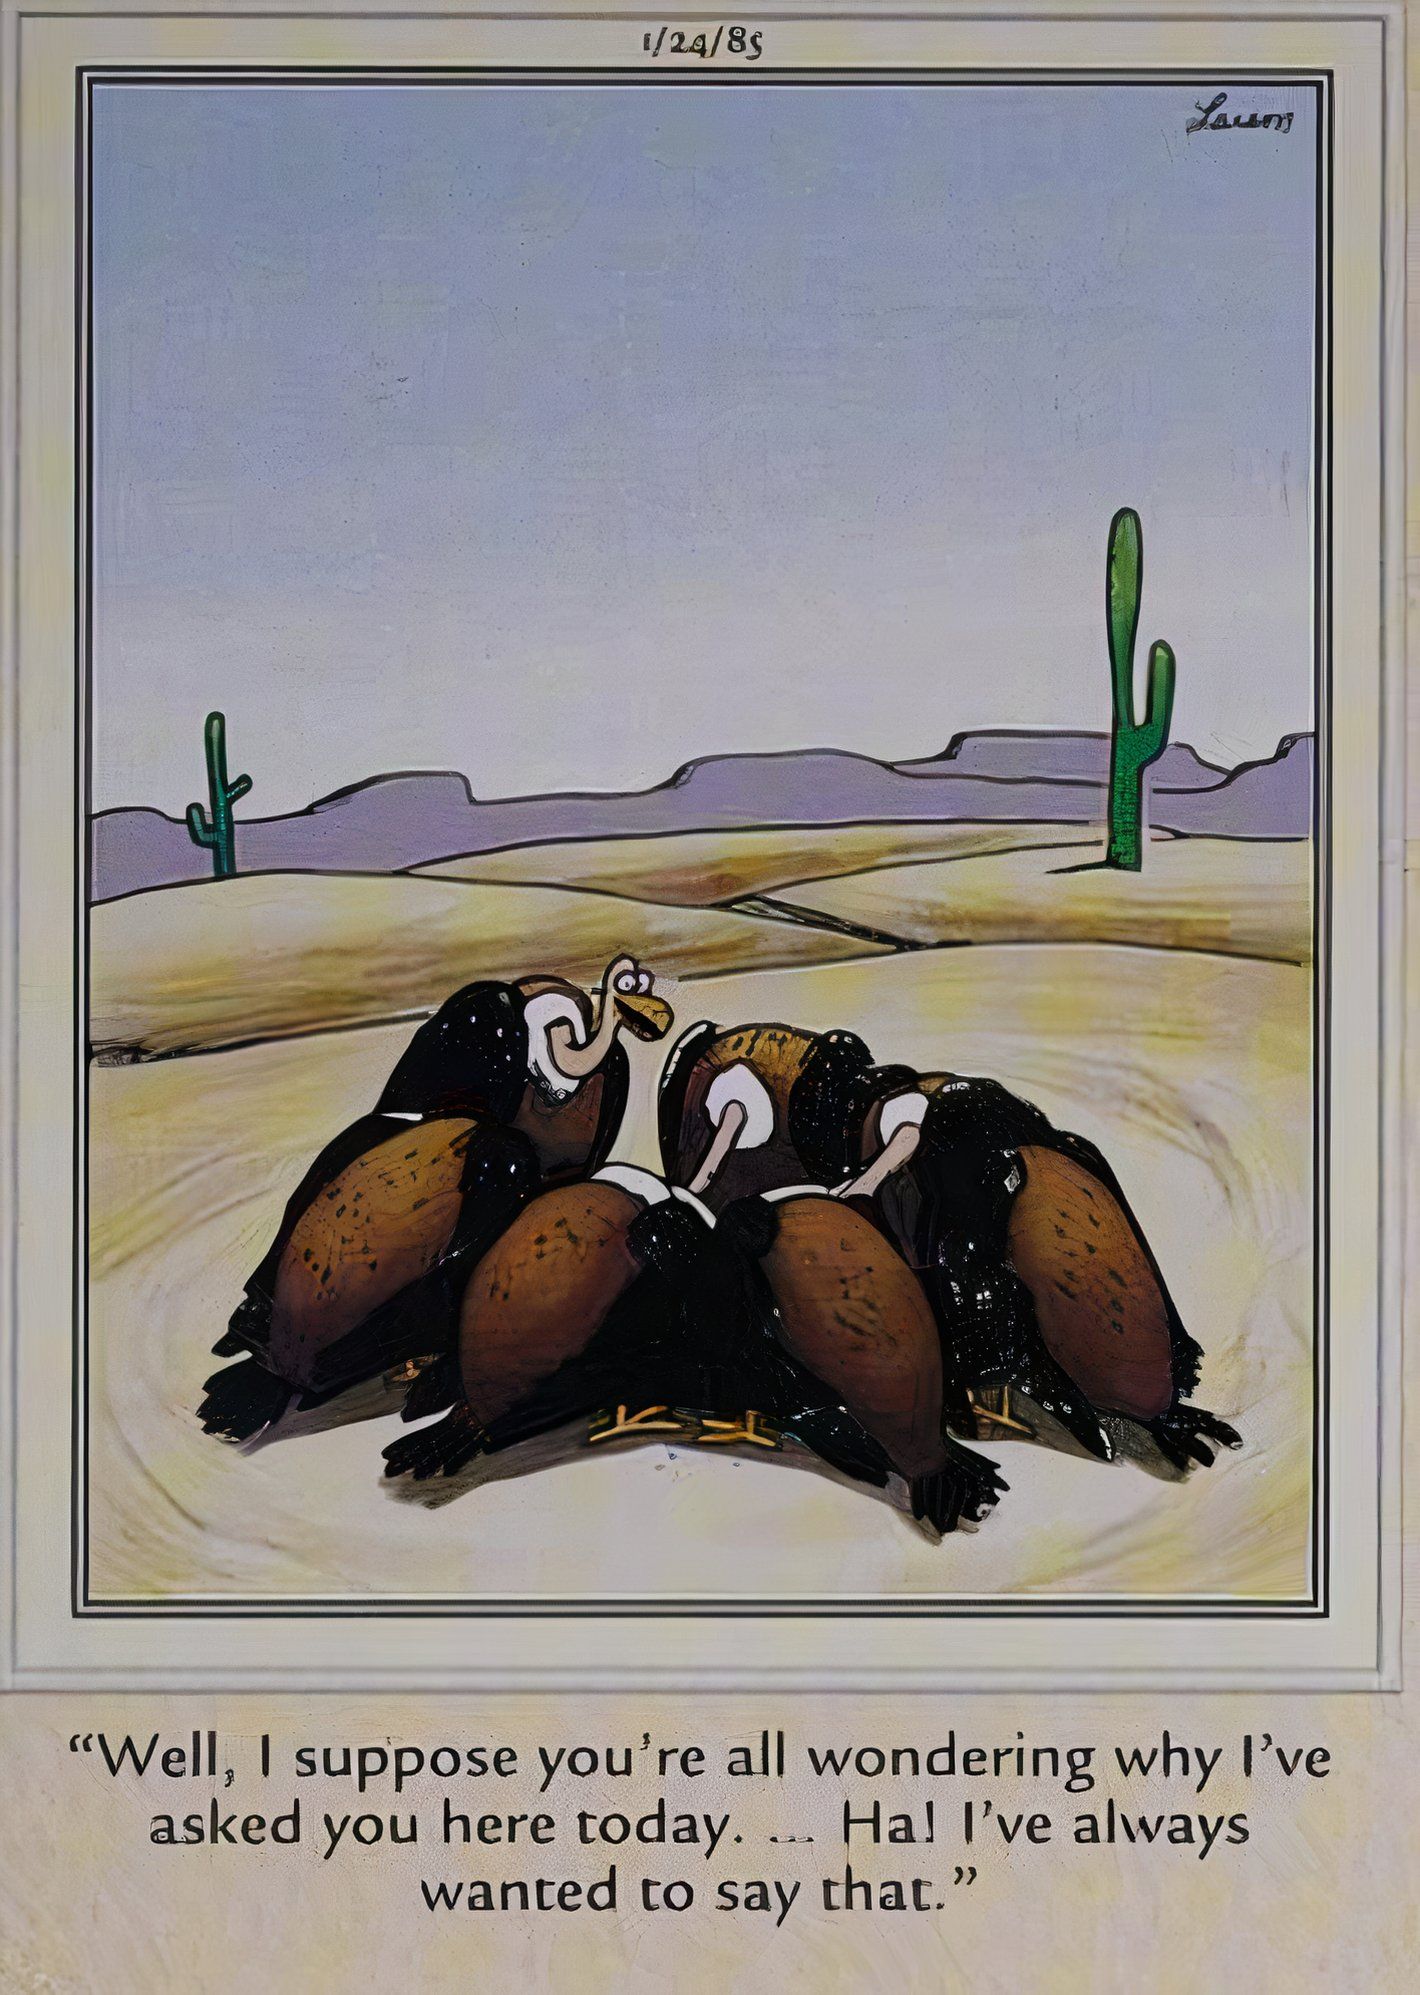 Far Side, vulture jokingly asks 'I suppose you're all wondering why I called you here today'